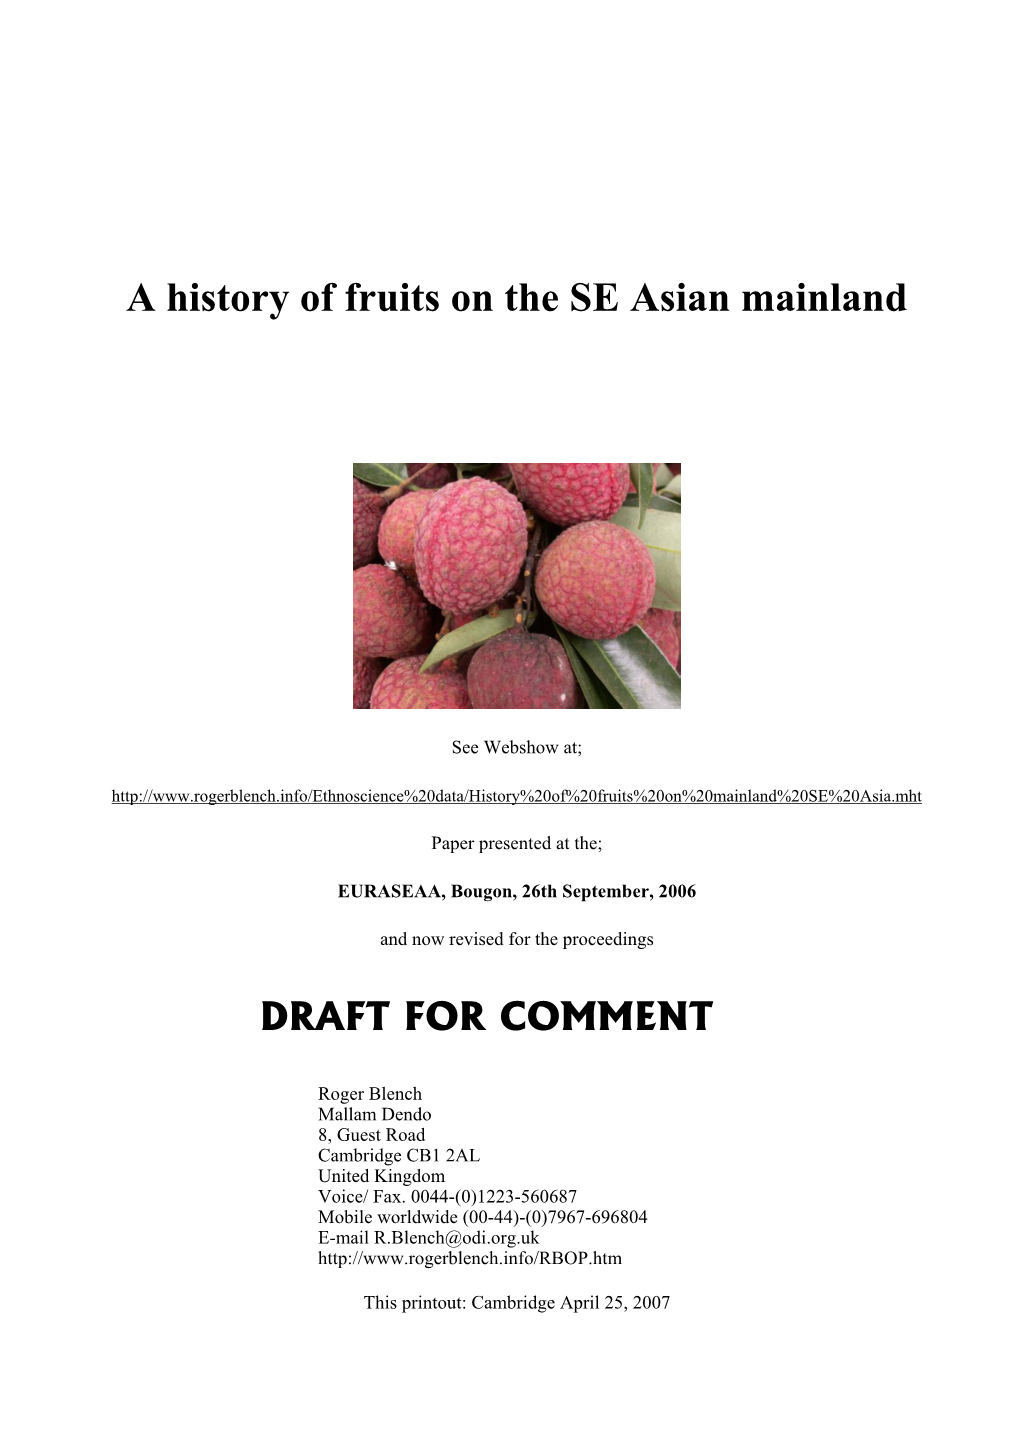 A History of Fruits on the SE Asian Mainland